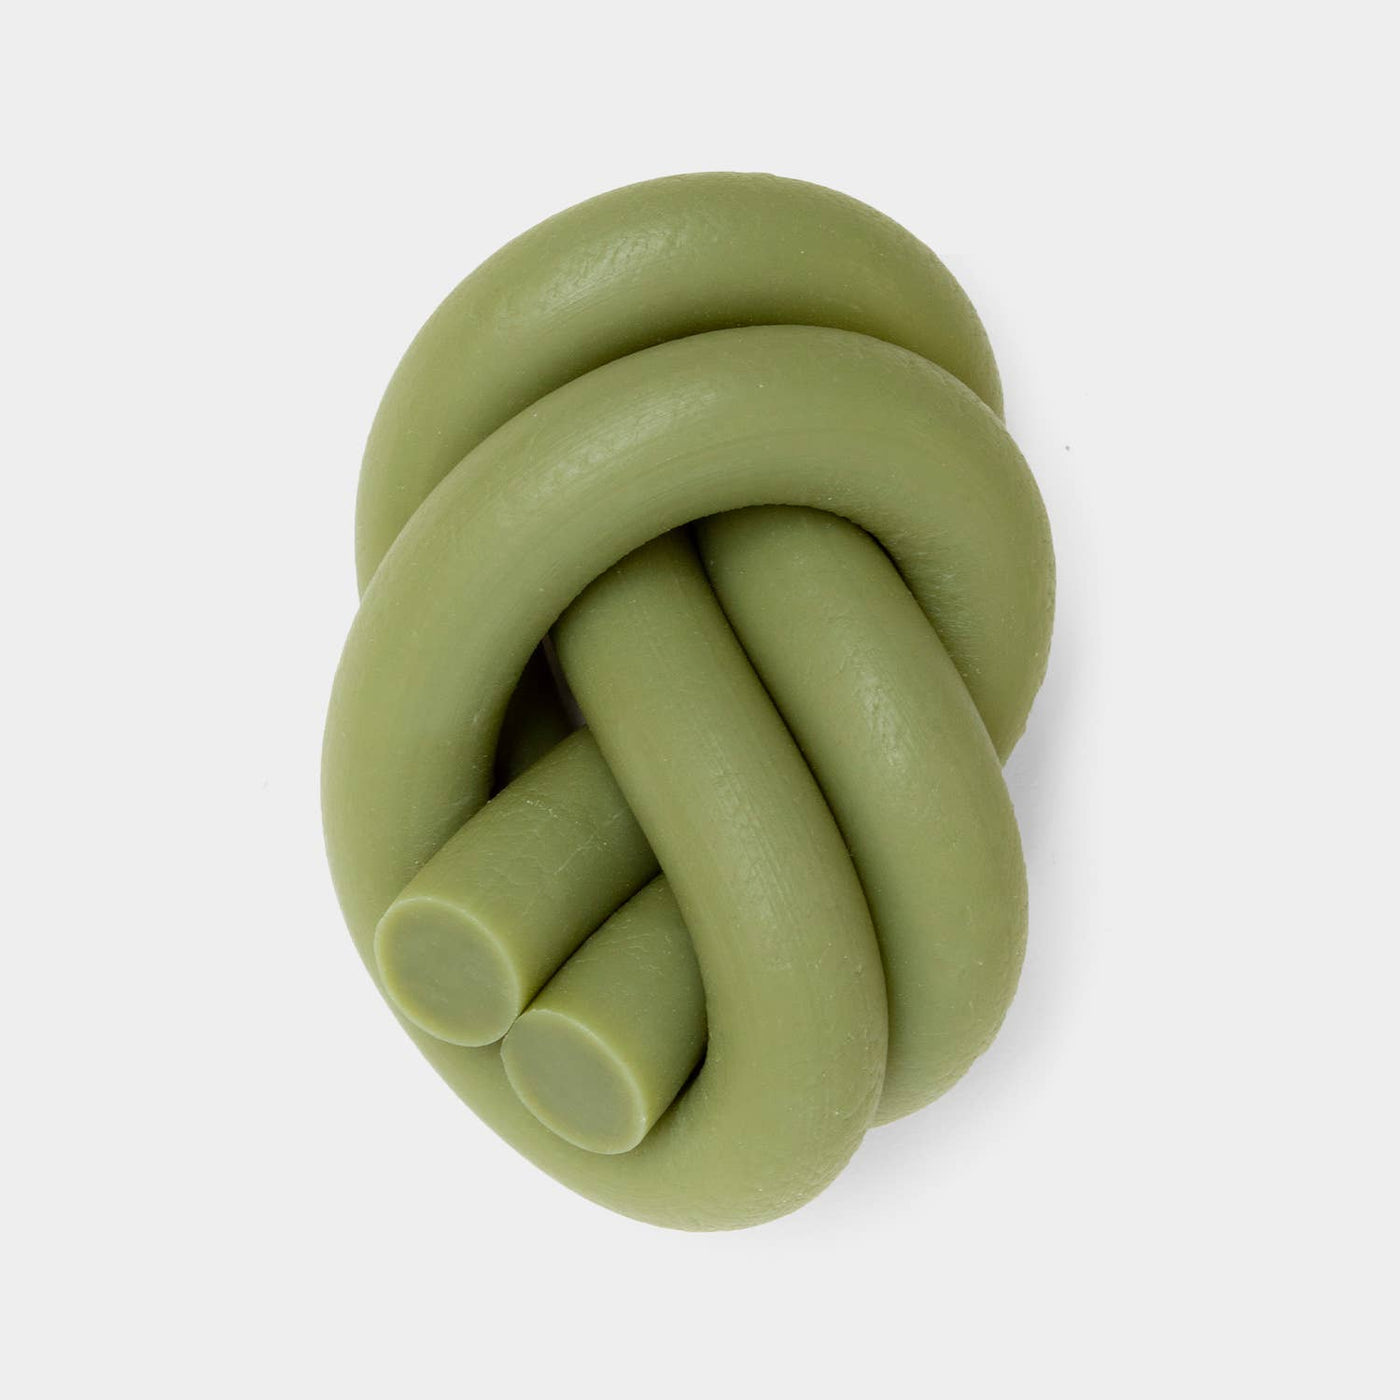 Olive Green NOEUD Soap by Lex Pott - The Grey Pearl